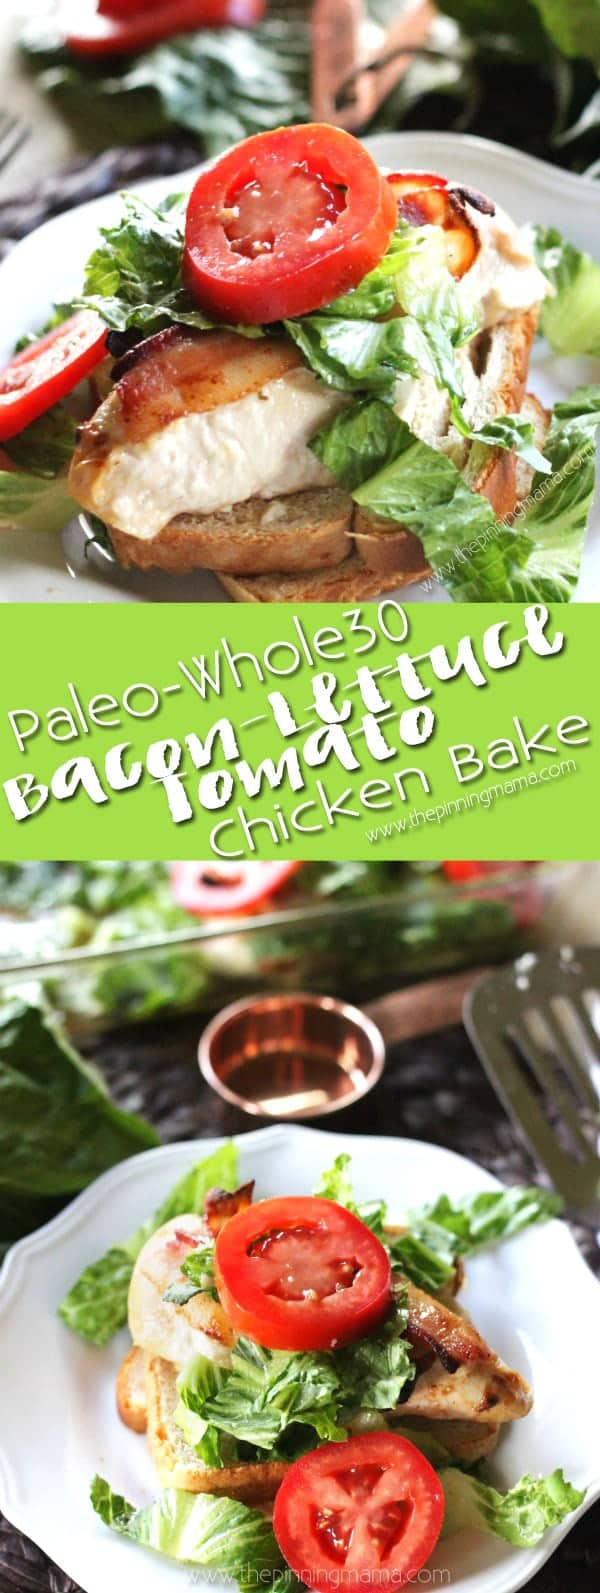 BLT Chicken Bake Recipe - Quick and easy chicken dinner, so delicious AND Paleo + Whole30 compliant recipe. I love it when I can find quick recipes because so many seem to take hours to get onto the table! Dairy free, grain free low carb dinner idea!